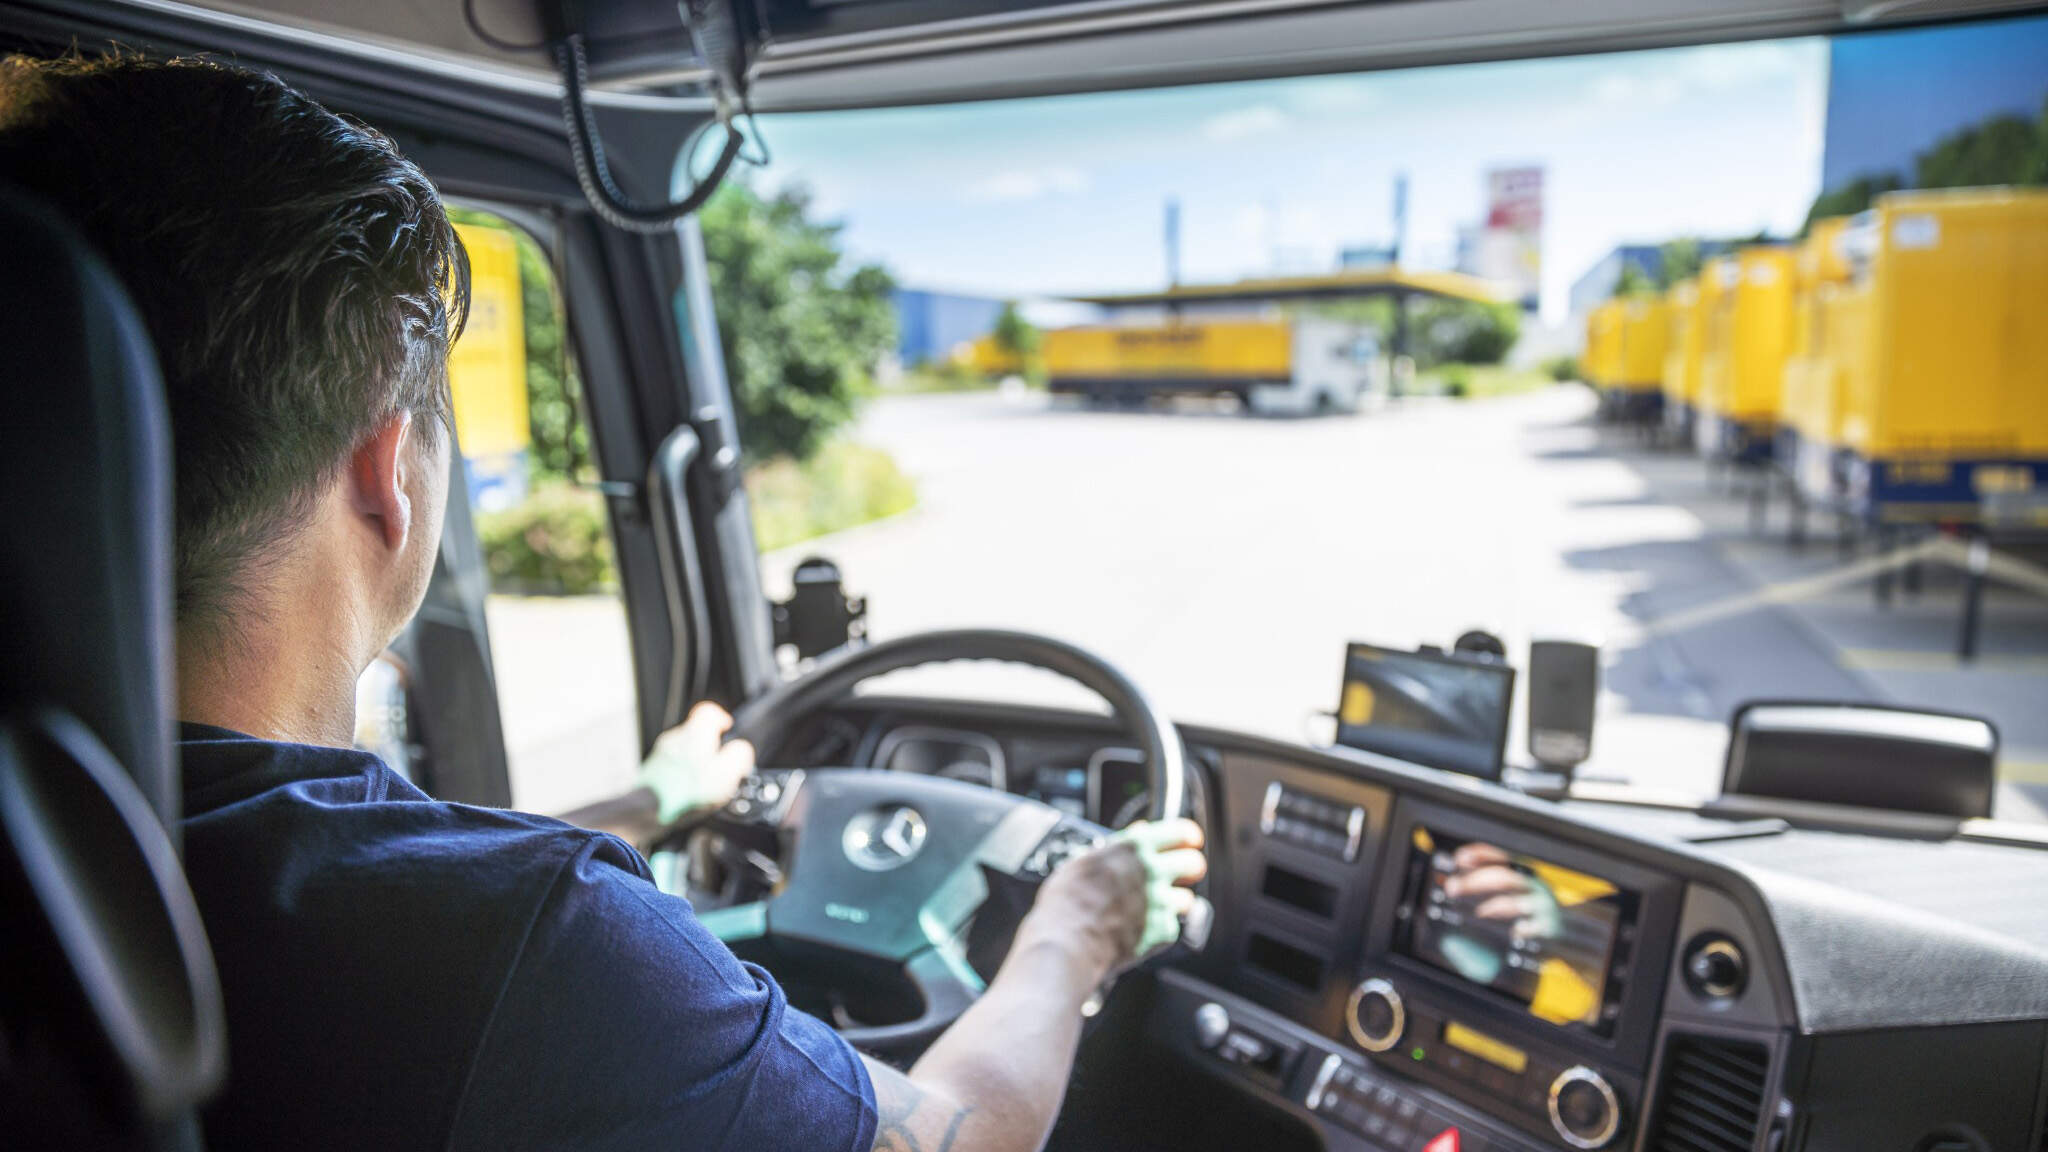 As part of a holistic climate protection campaign, DACHSER is implementing a training concept for professional truck drivers by the end of 2023.